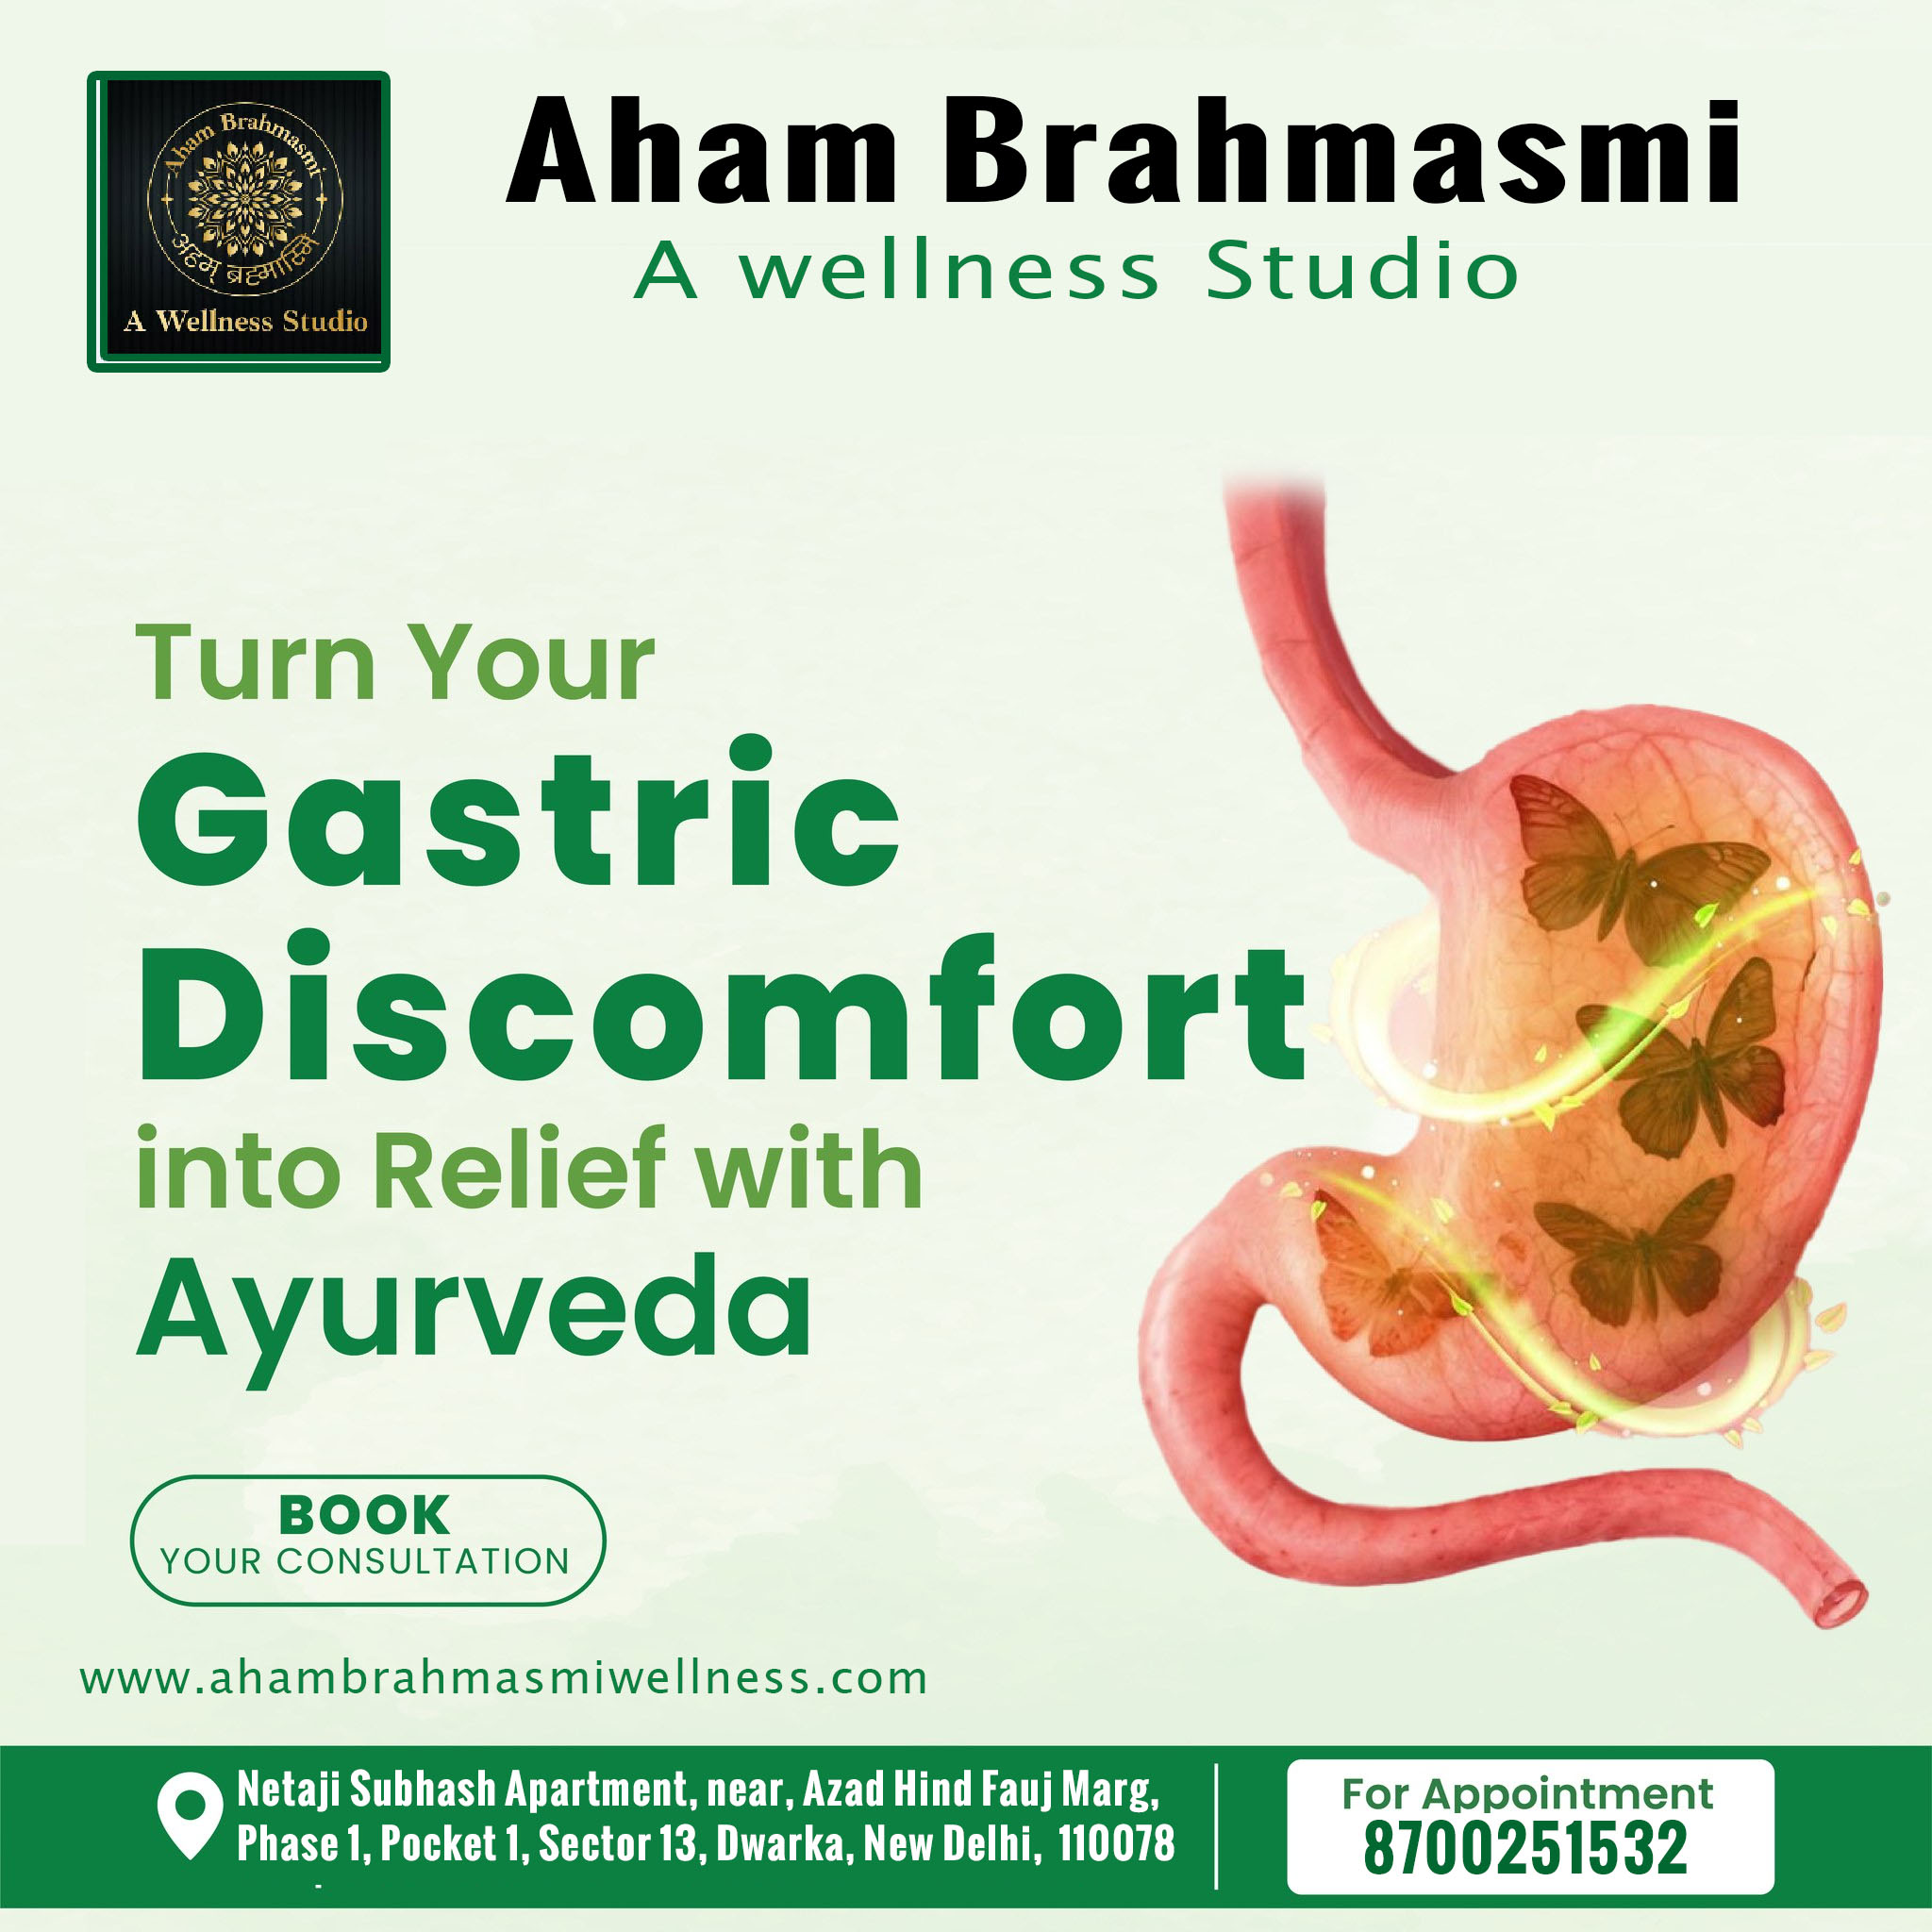 Turn Your Gastric DIscomfort into relief with Ayurveda.